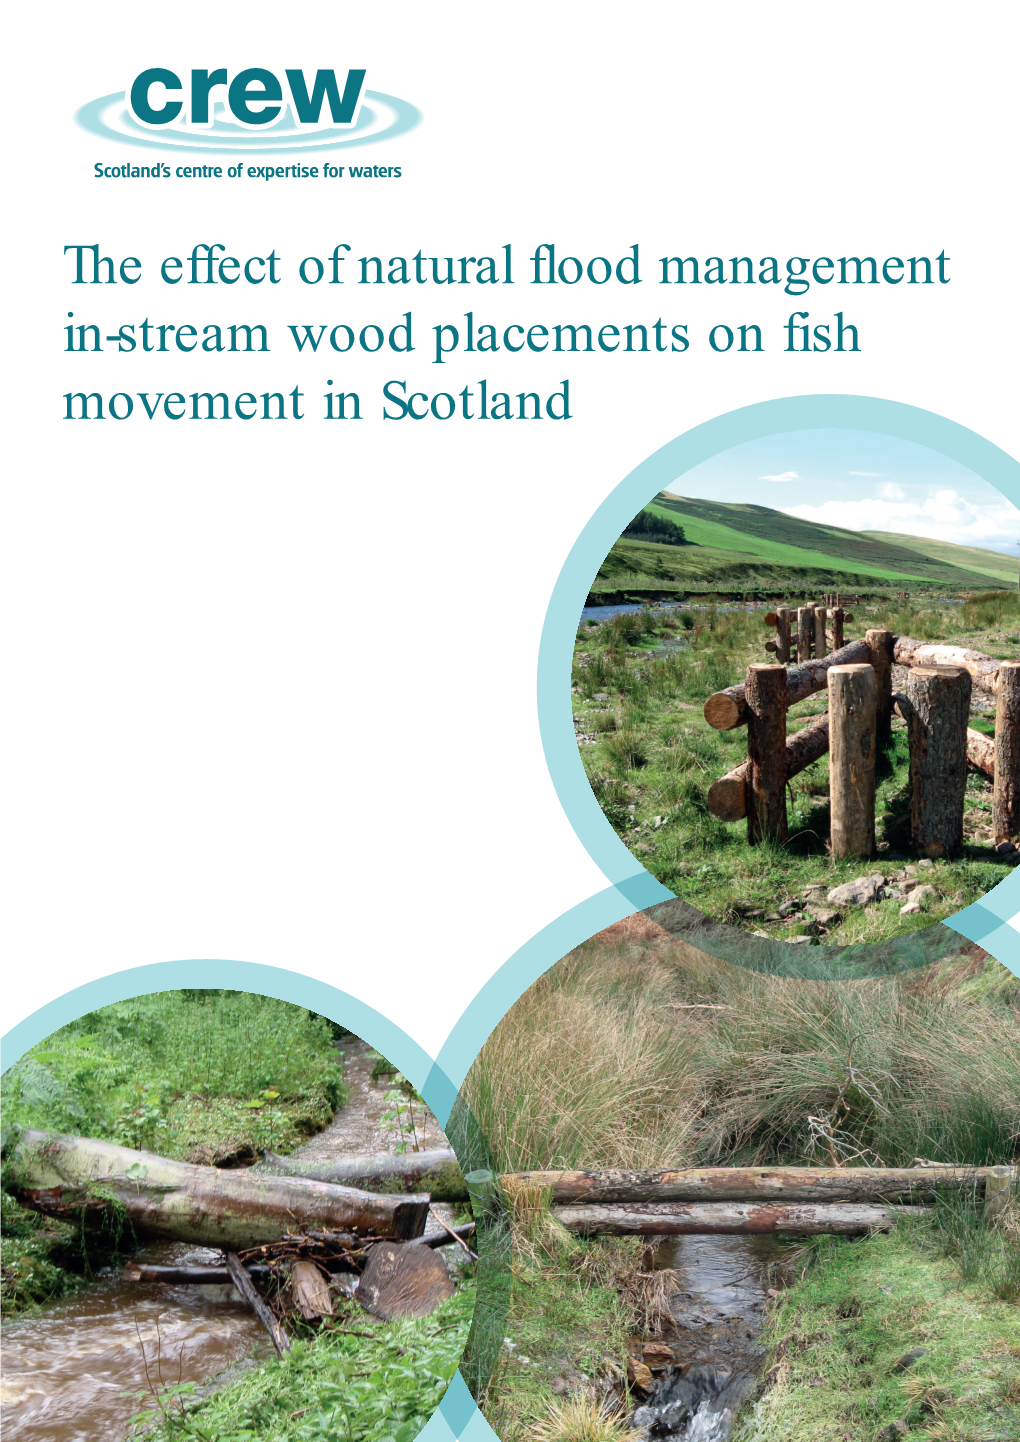 The Effect of NFM In-Stream Wood Placements on Fish Movement In